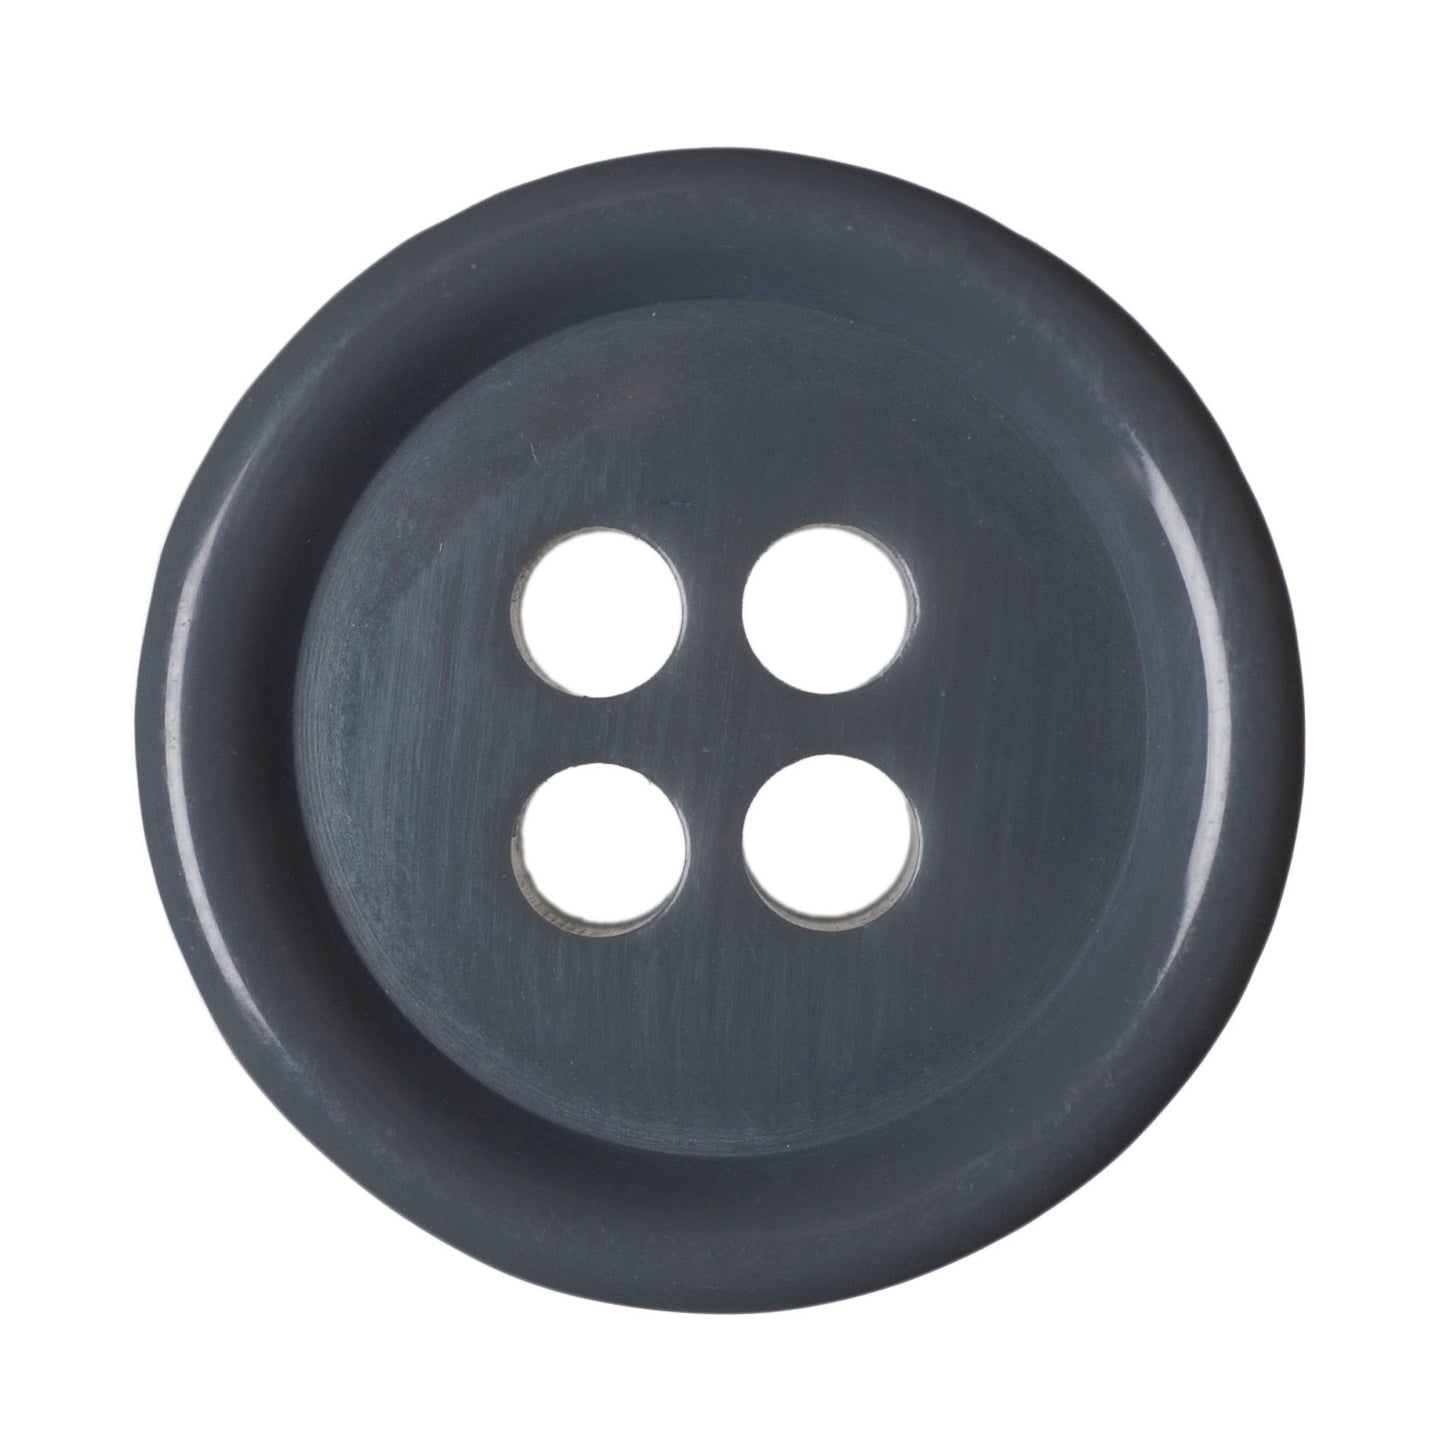 4 Hole Solid Jacket Button - 19mm - Grey [LC1.4]